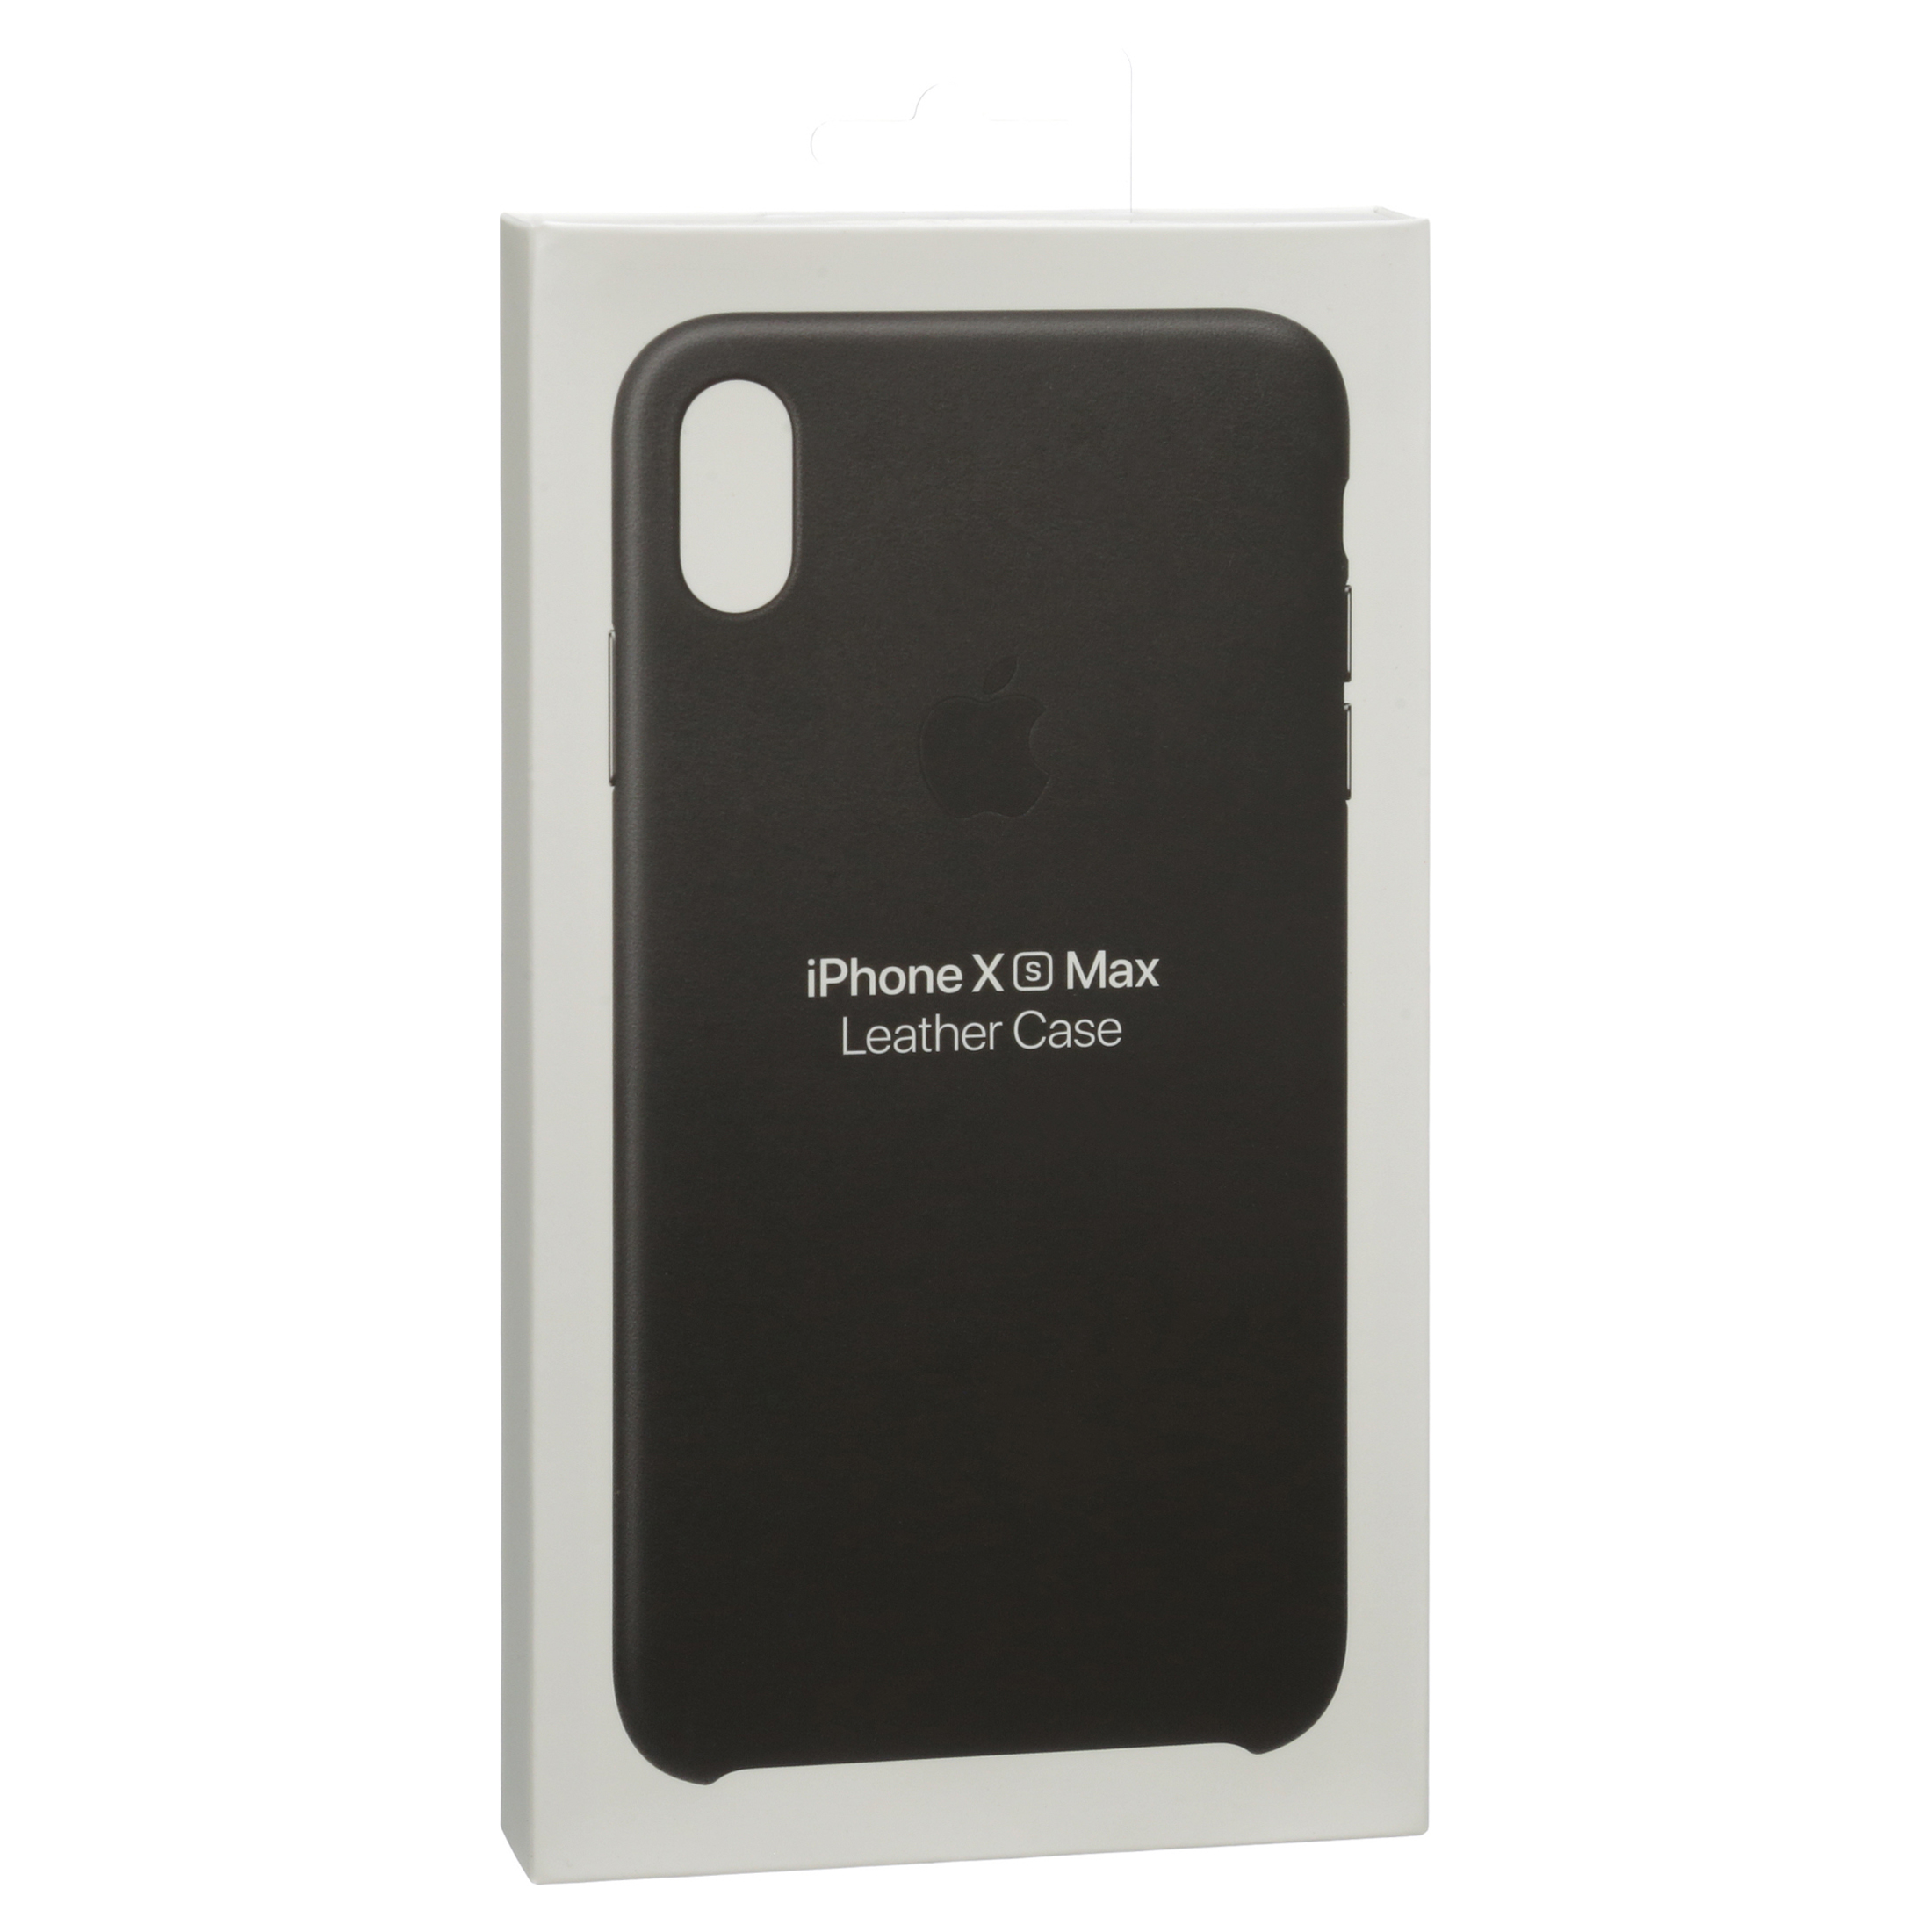 Apple Leather Case for iPhone XS Max - Black - image 4 of 8